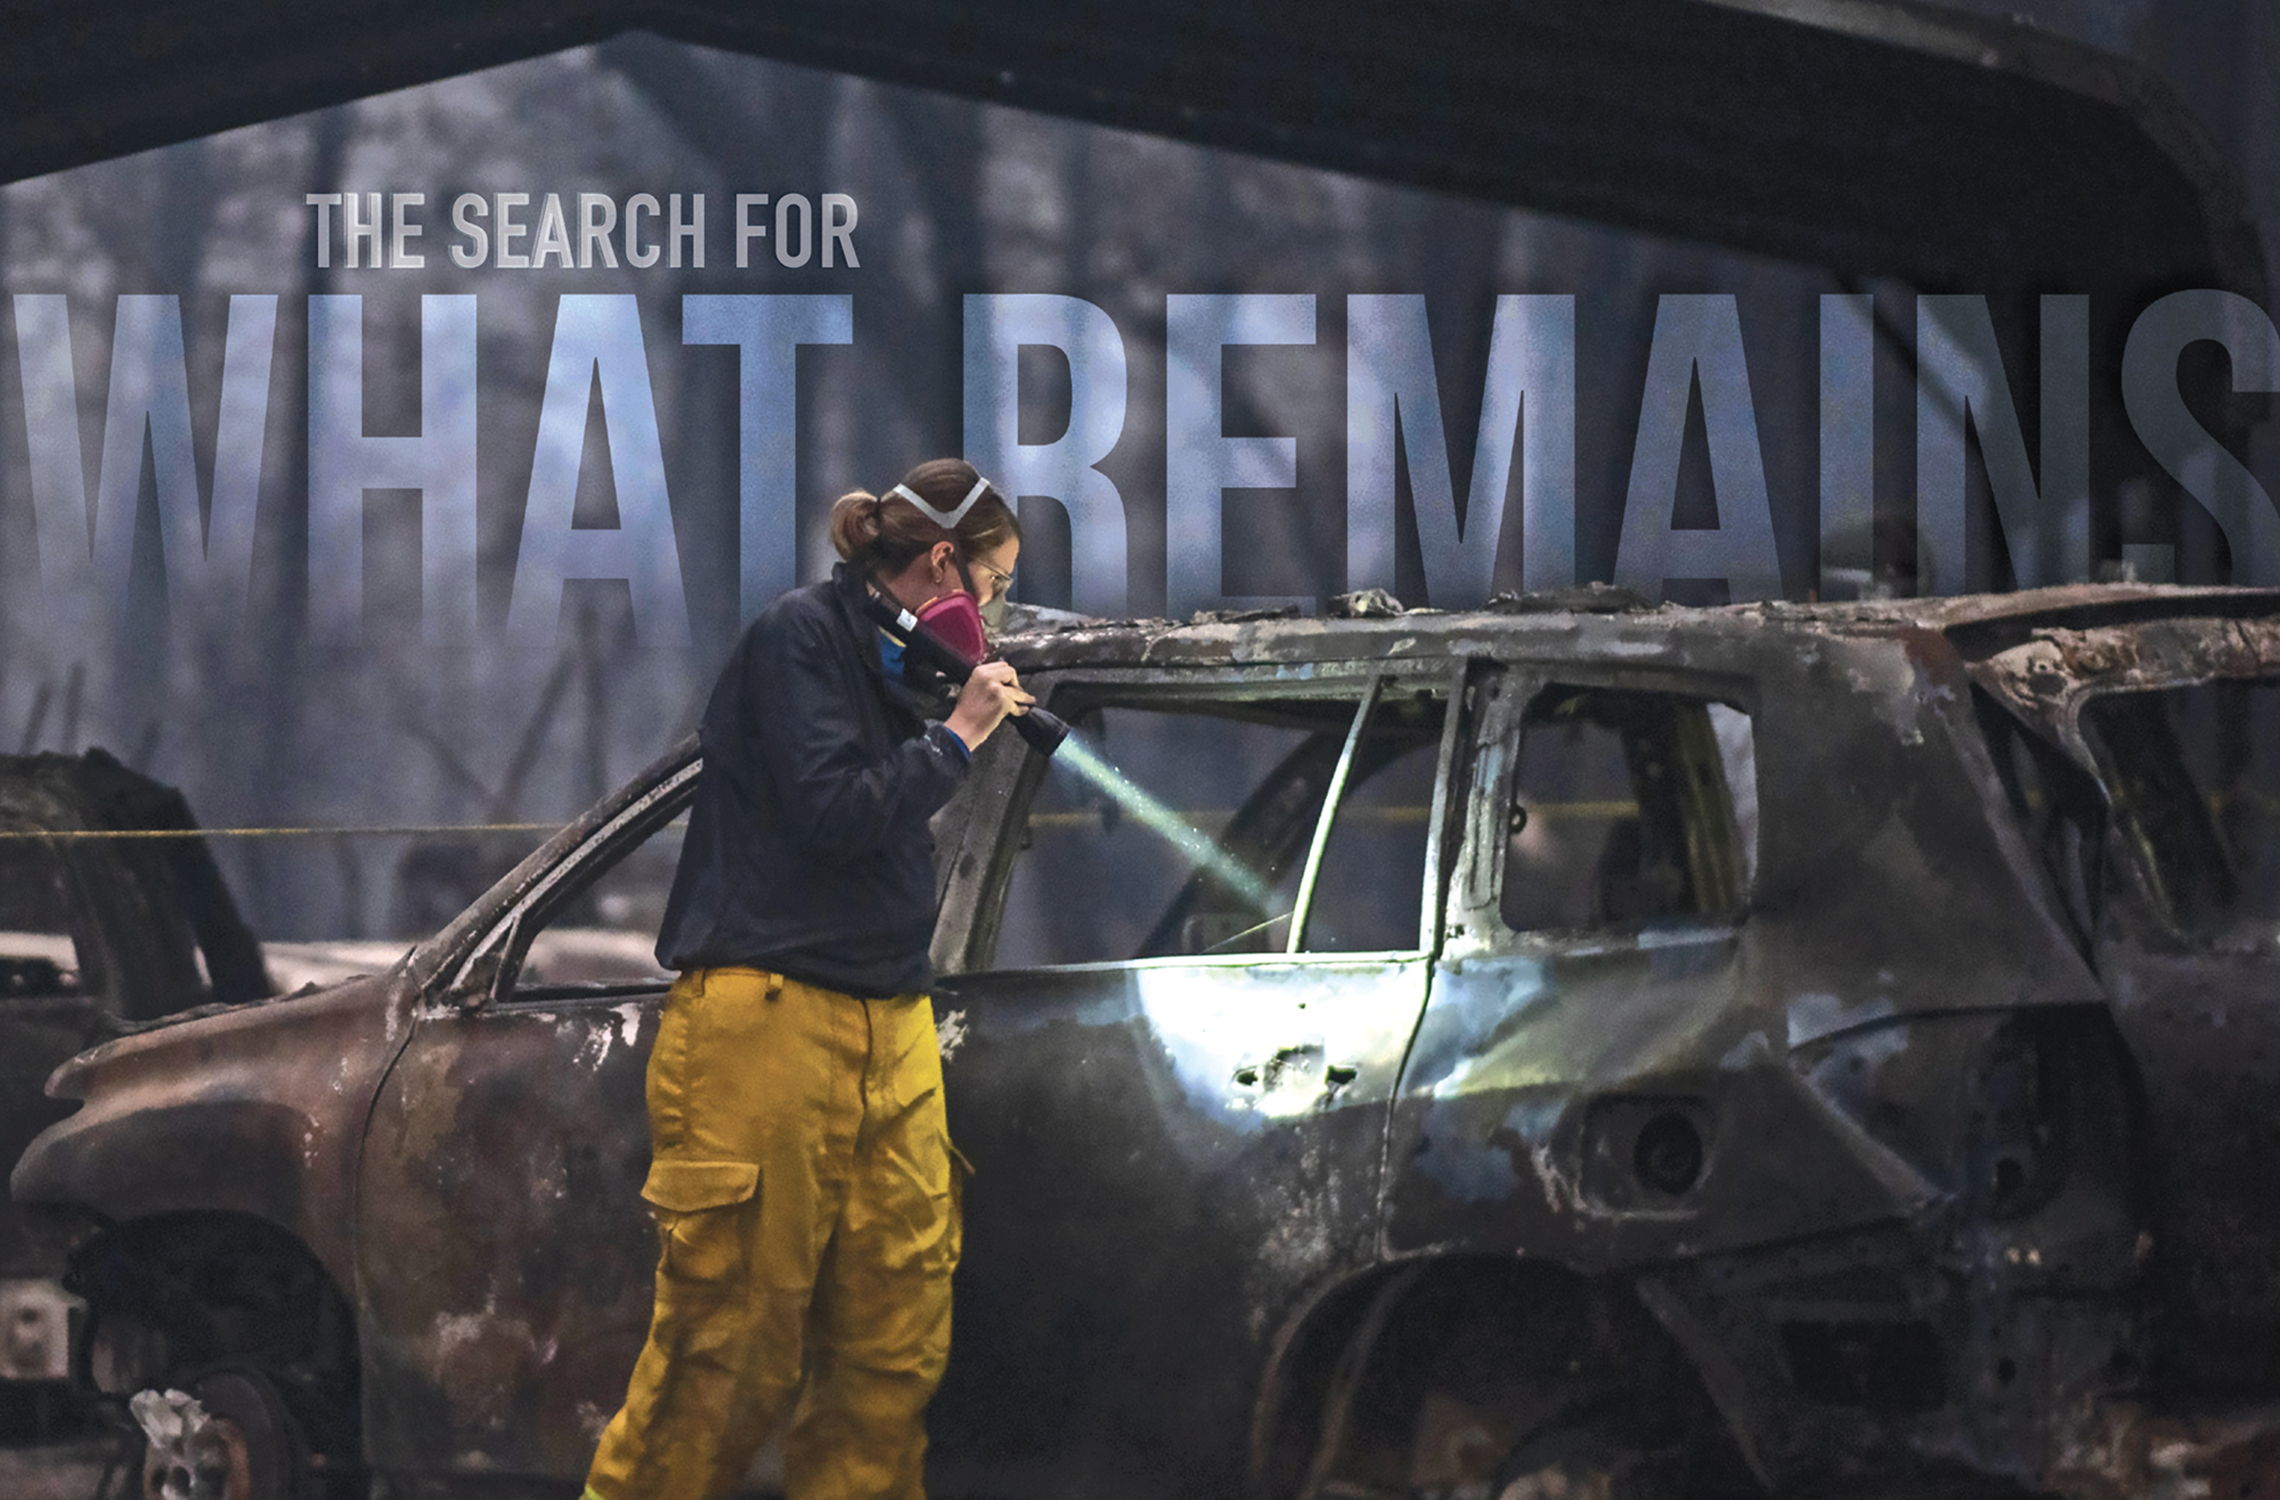 Karin Wells shines a flashlight into a burnt vehicle enshrouded in darkness from smoke with the text "The Search for What Remains" imposed bove